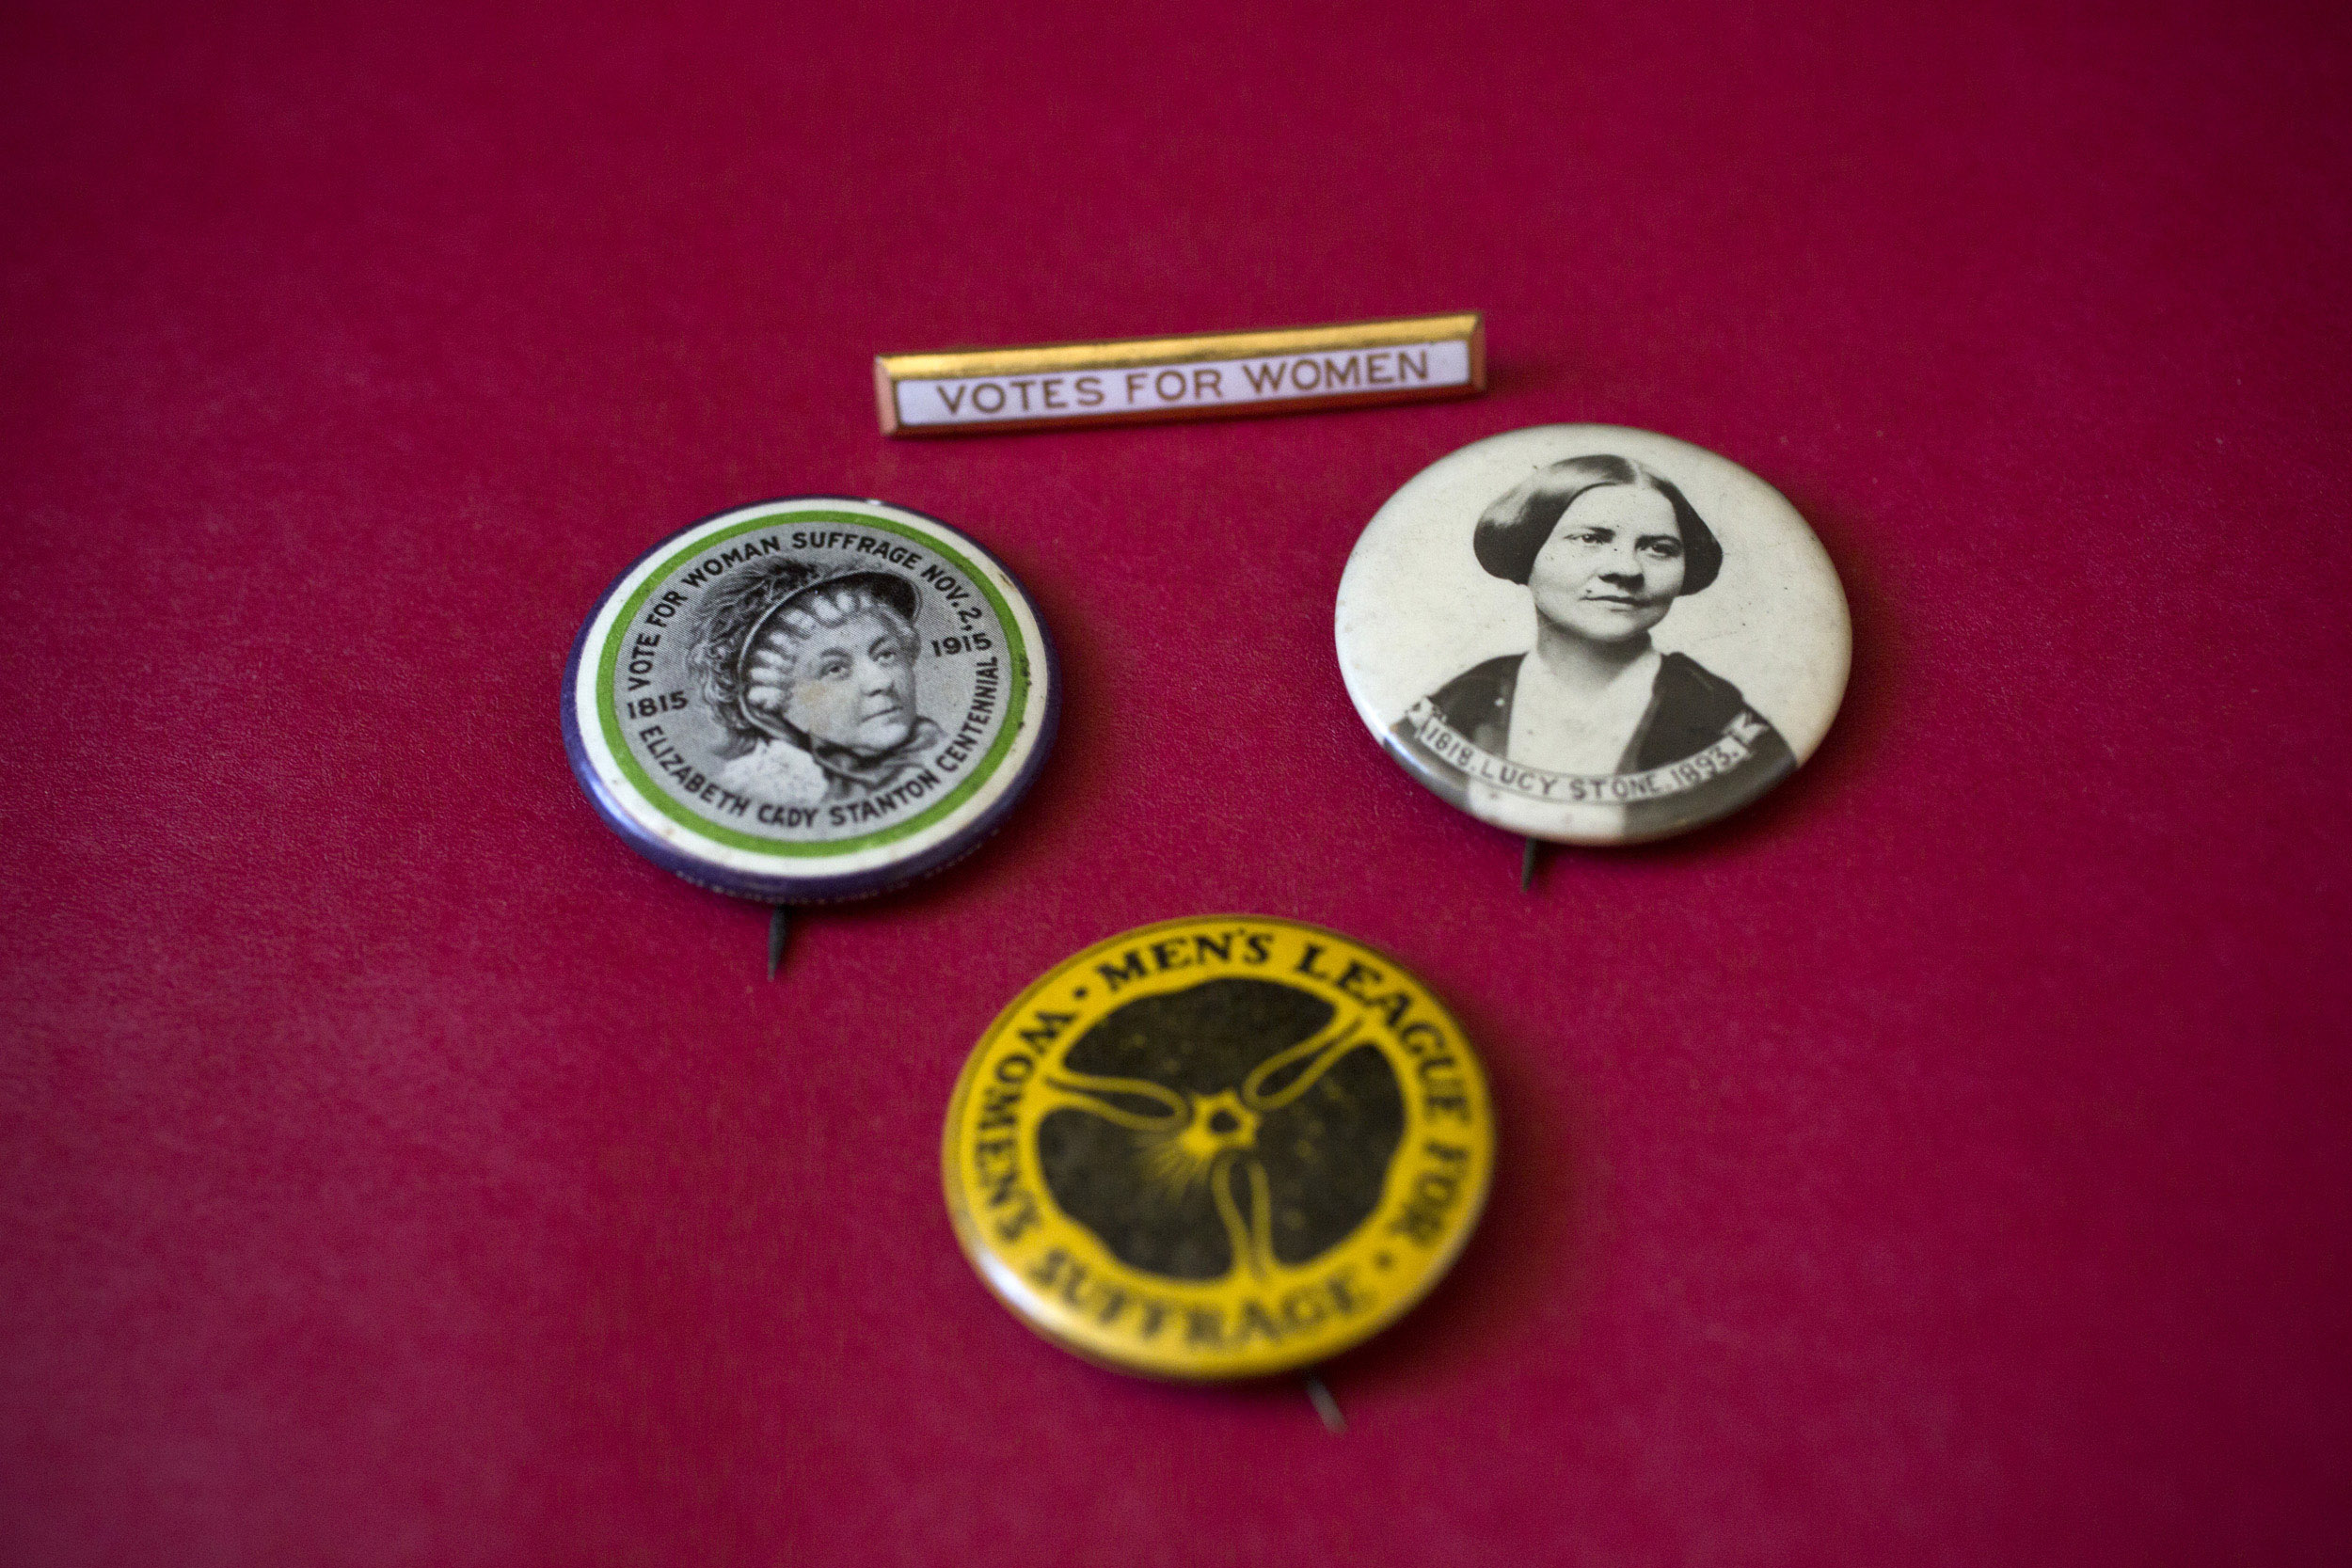 Women’s suffrage buttons show the likenesses of early suffragists Elizabeth Cady Stanton and Lucy Stone.